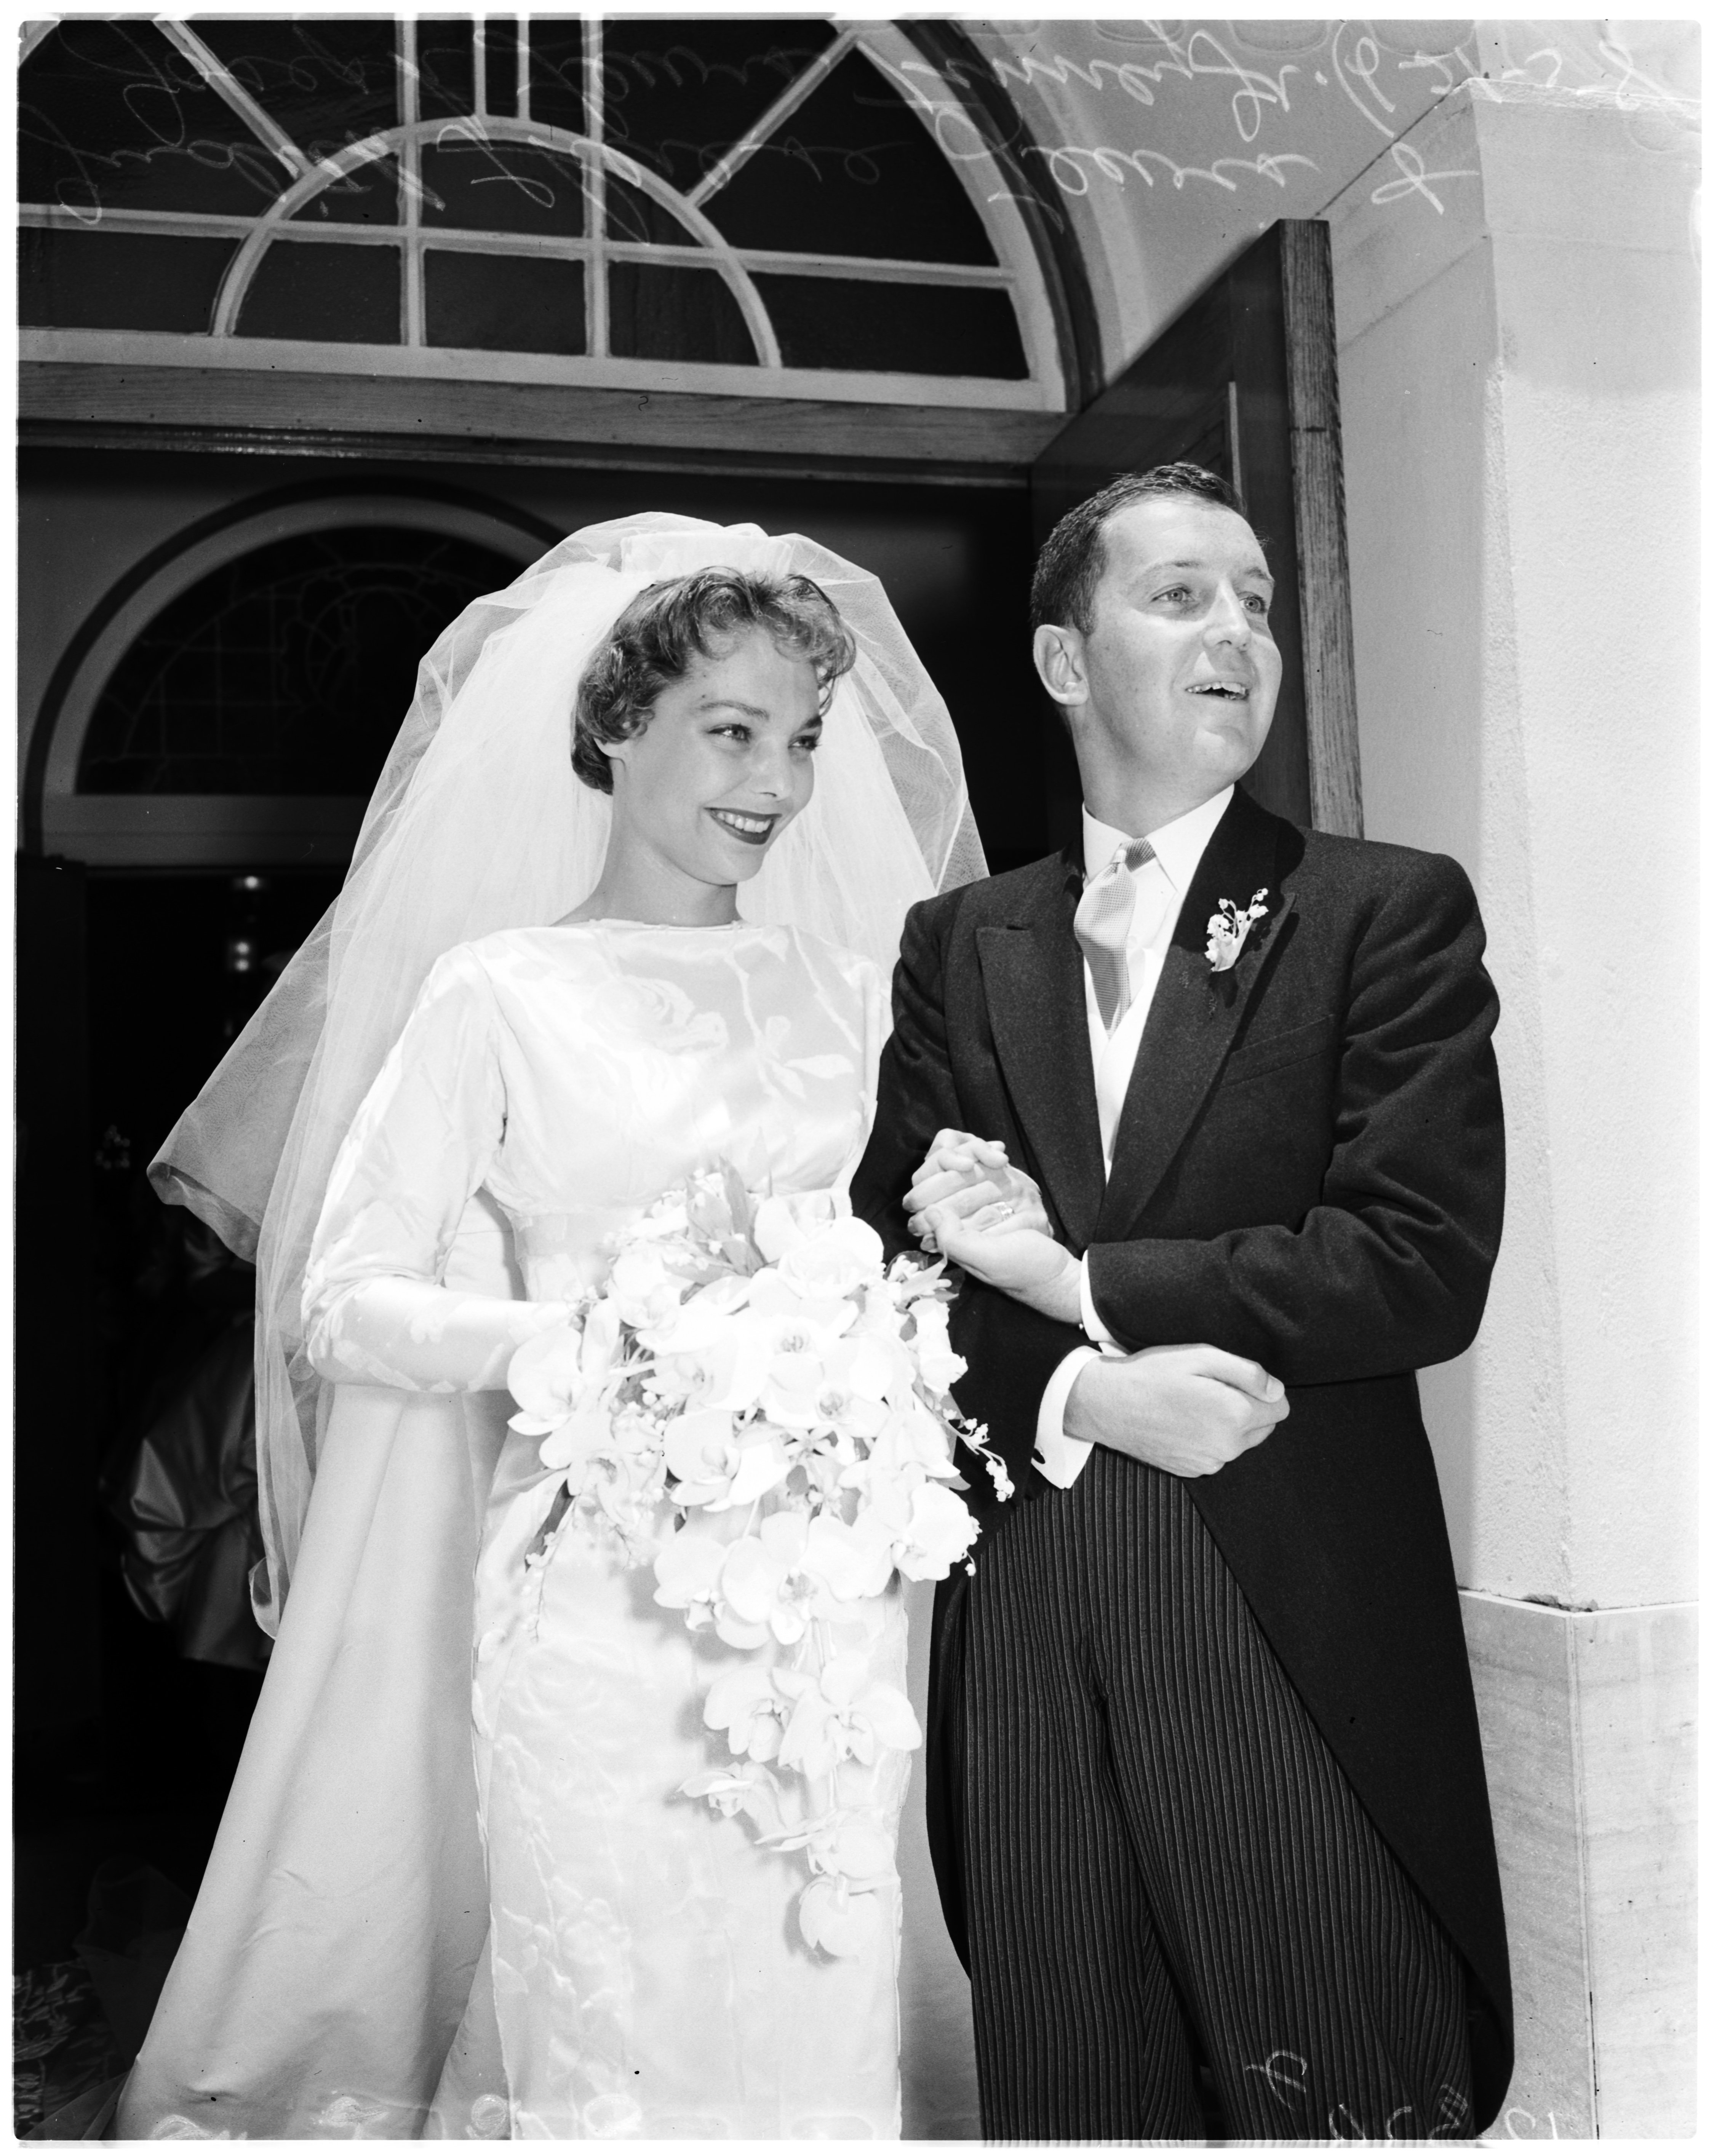 Judy Lewis with her husband Joseph Tinney on their wedding day in 1958. | Source: Getty Images 